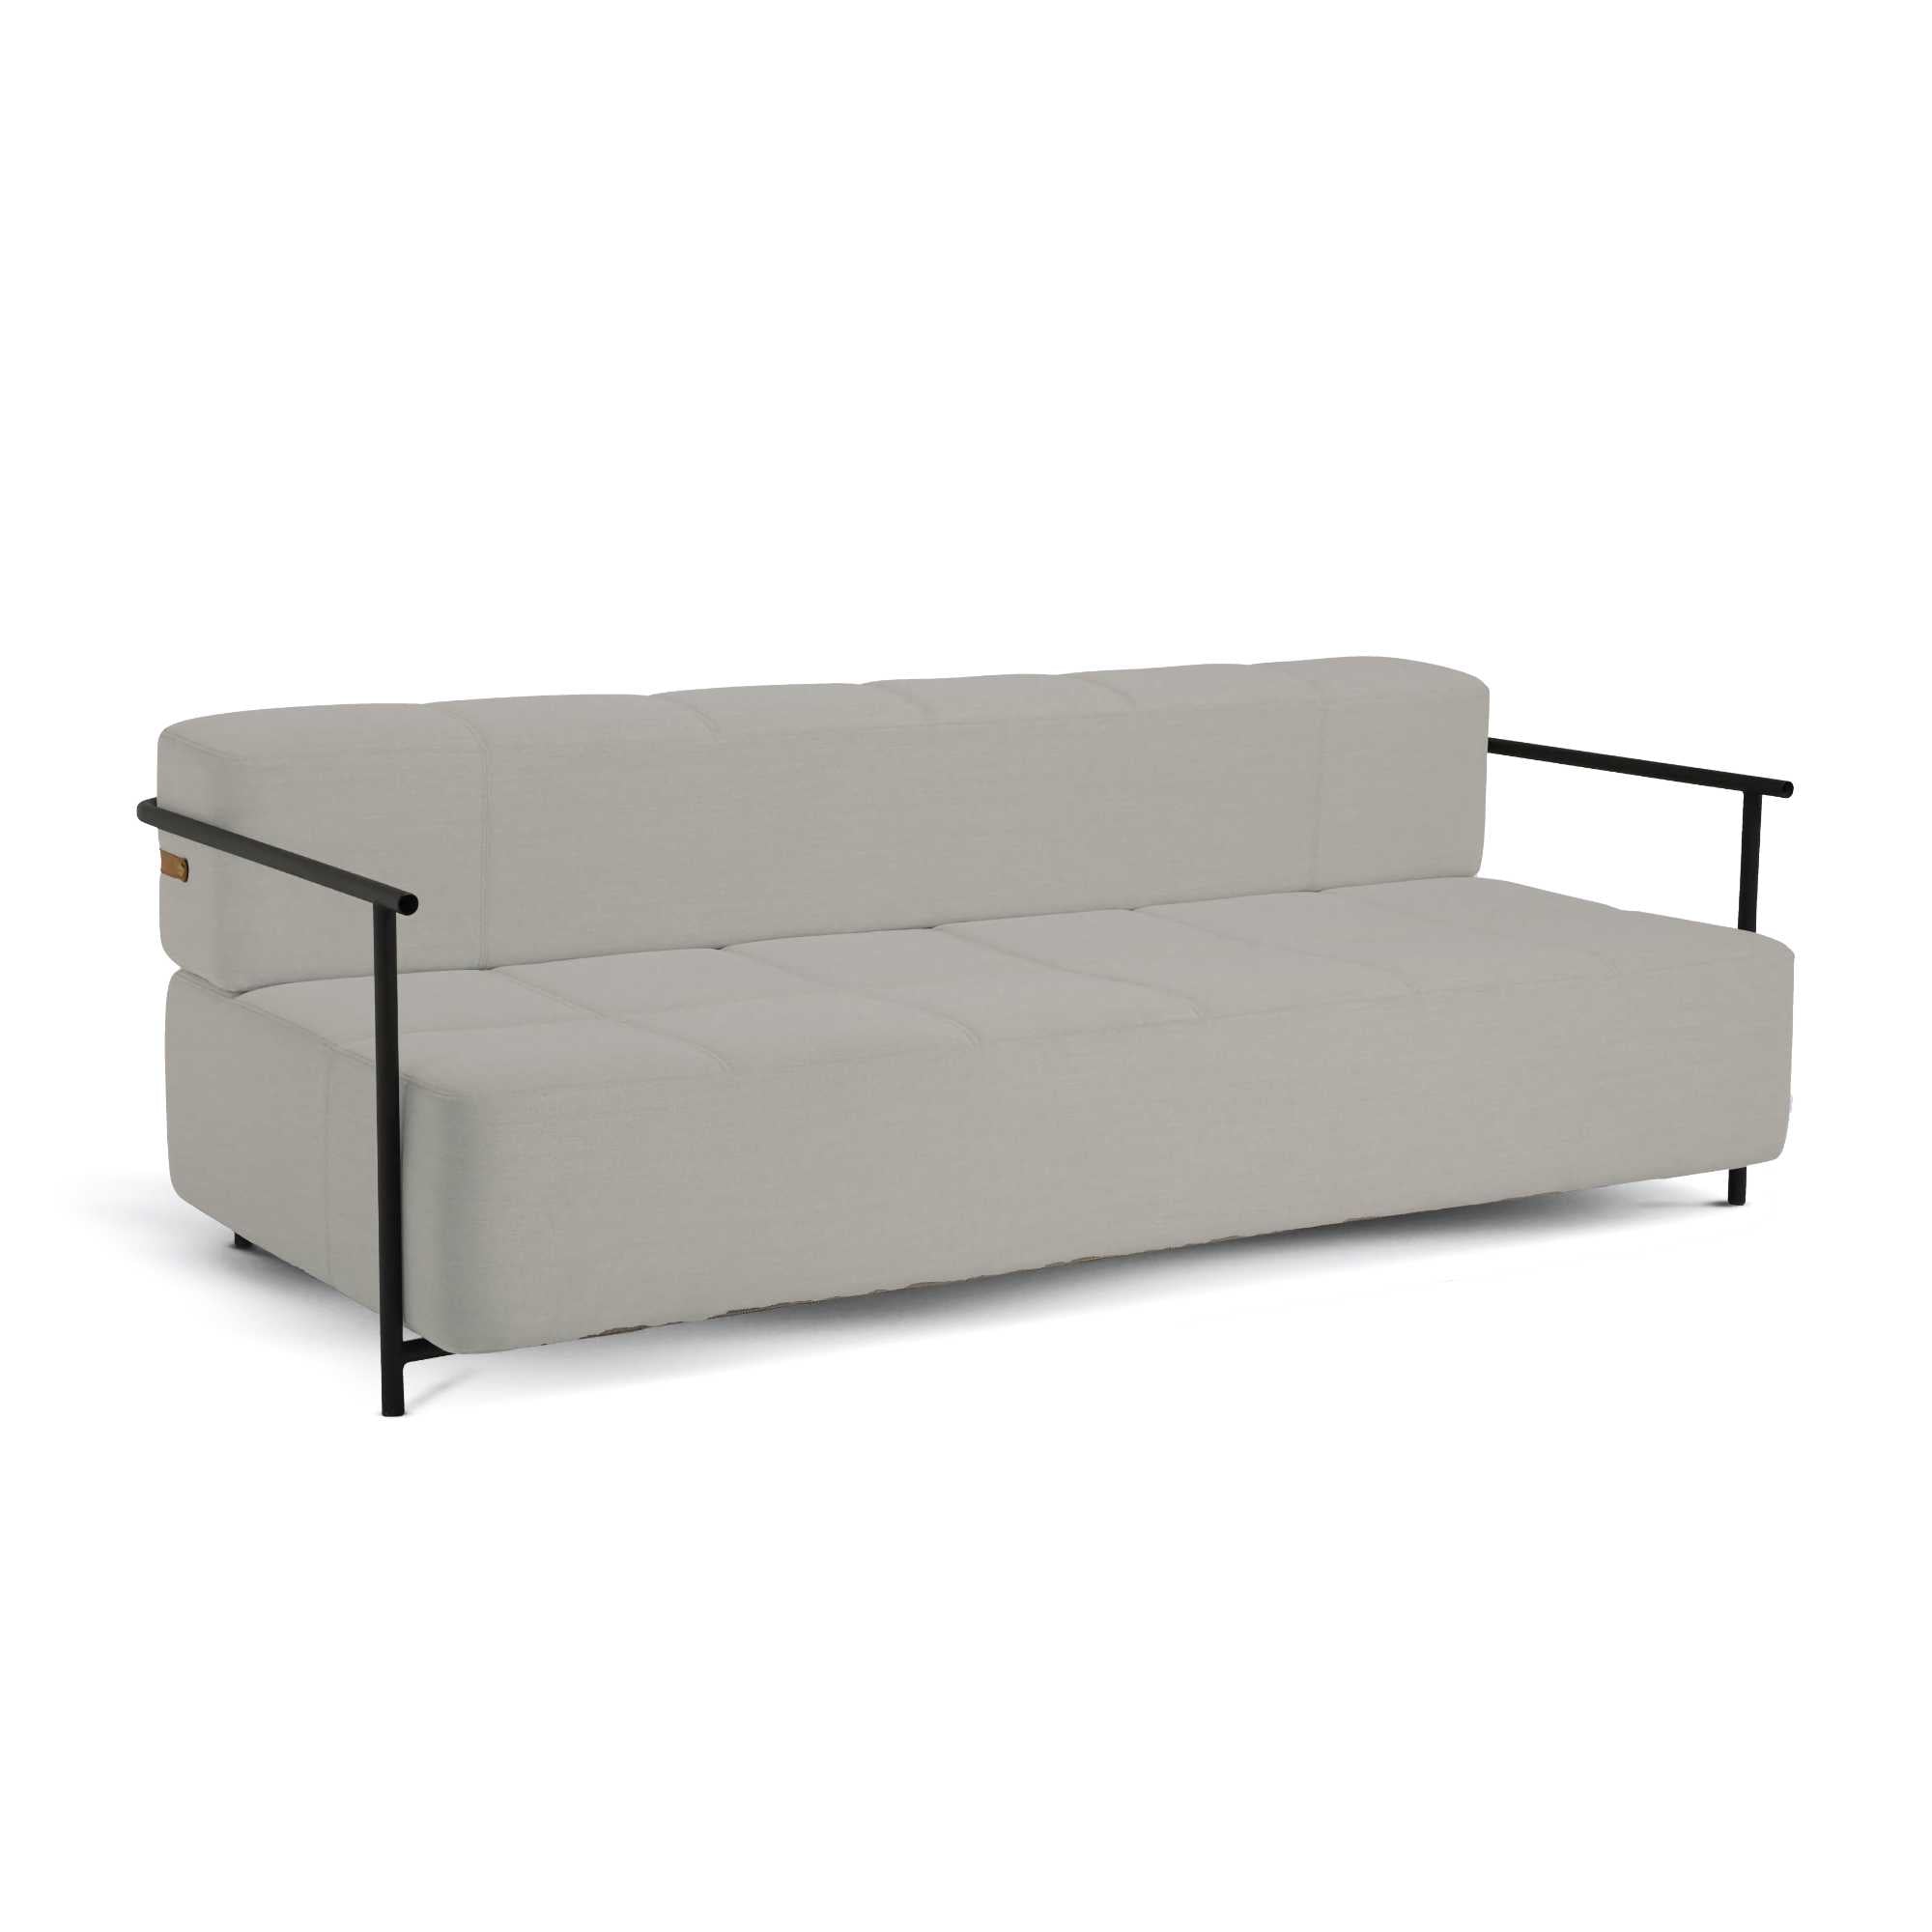 Northern Daybe Sofa with Armrests